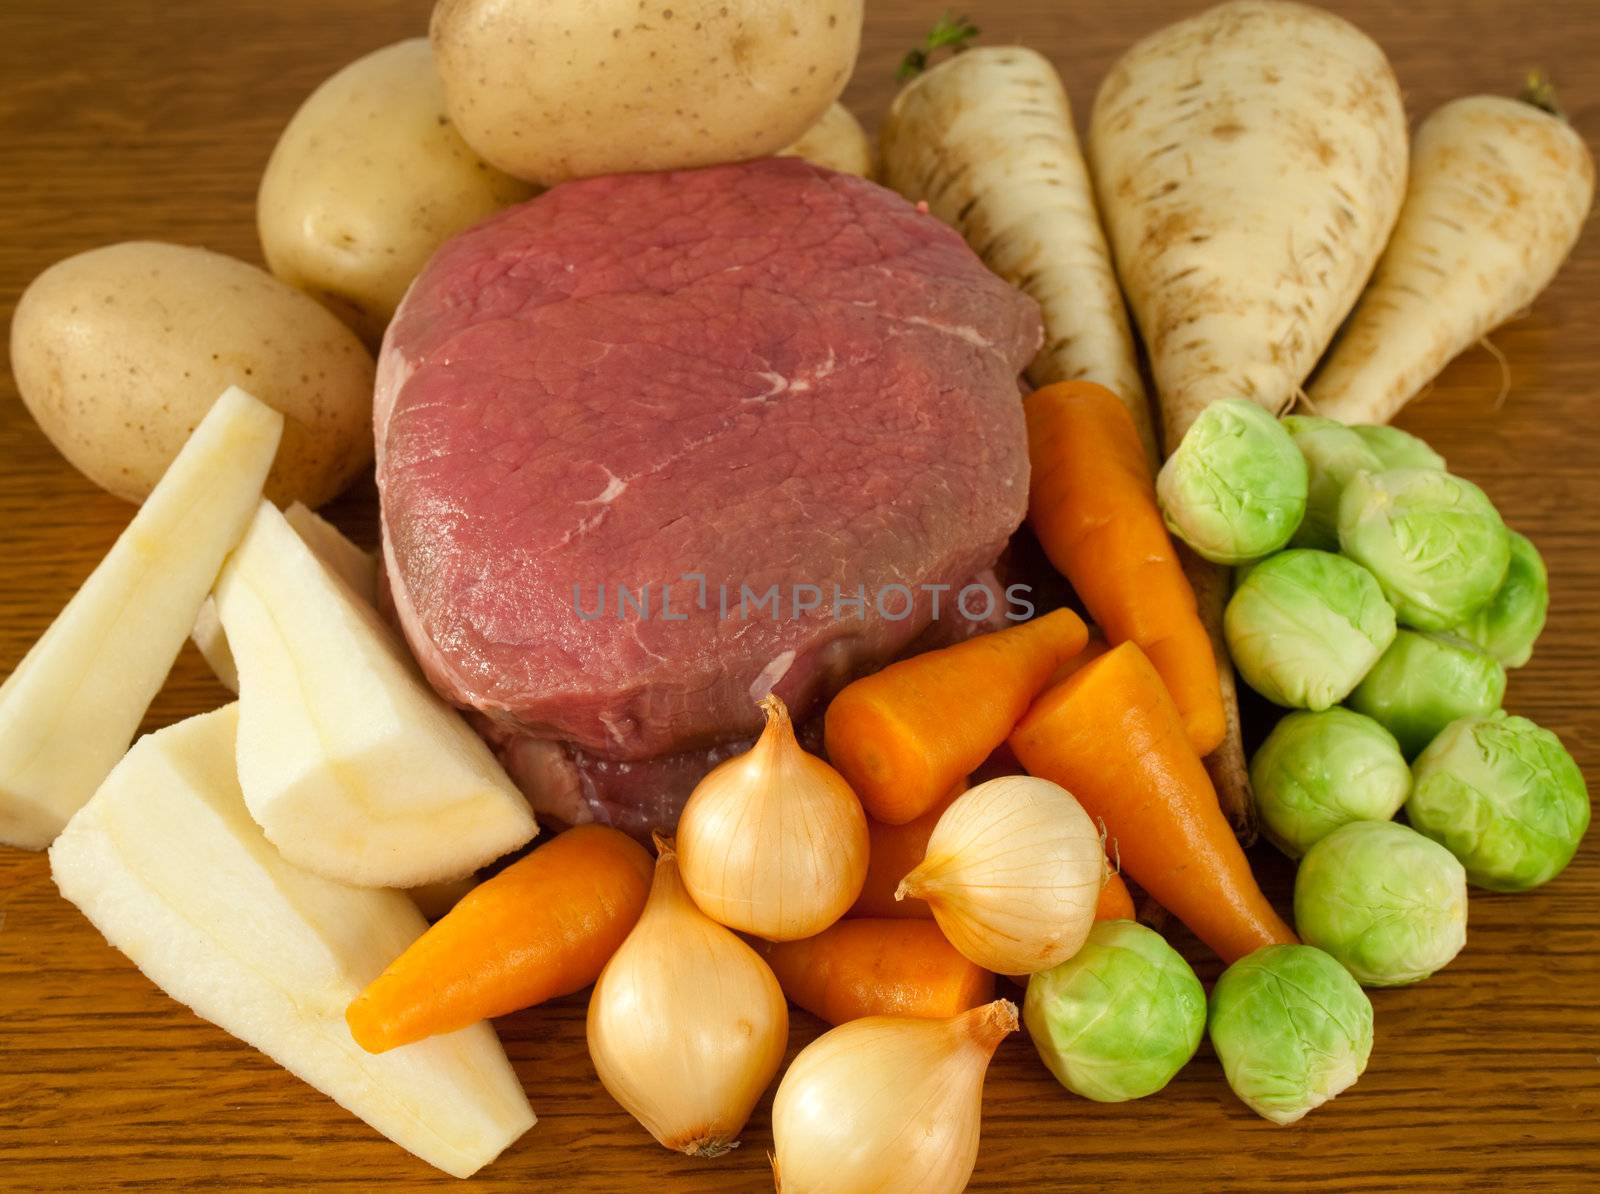 Beef and vegetables by Clivia